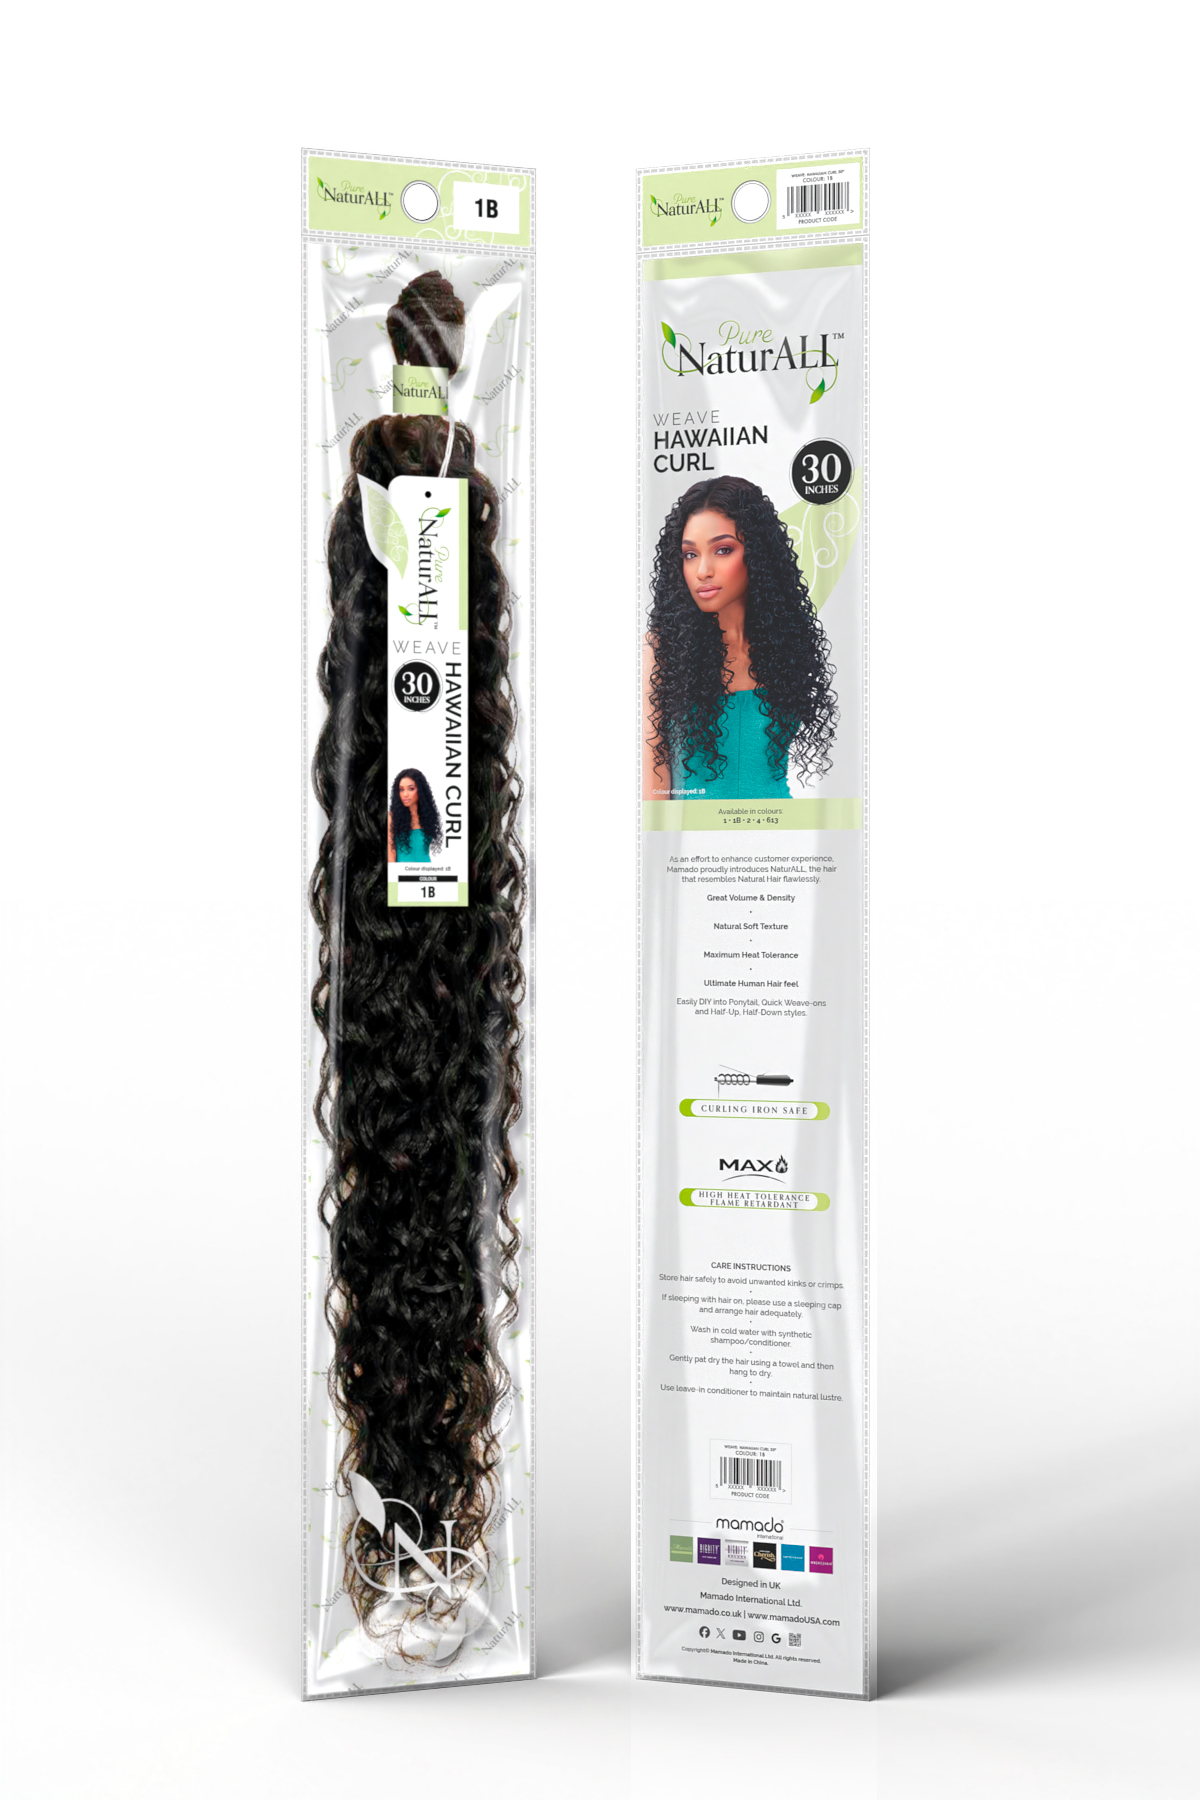 Visual of front and back of a NaturALL Hawaiian Curl weave hair pack as created by Paul Cartwright Branding.